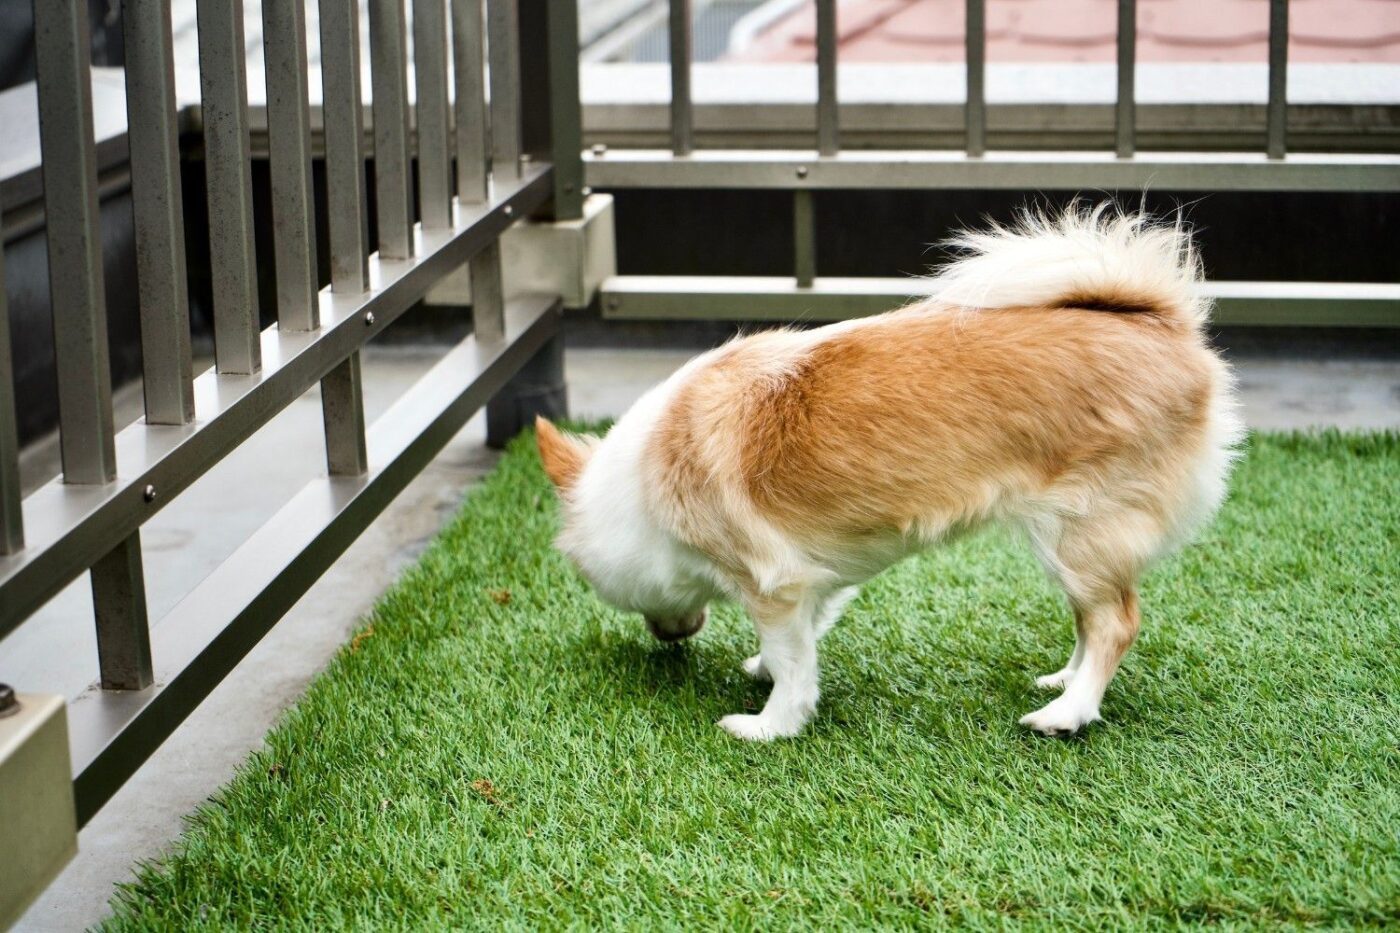 Small dog with light brown and white fur, standing on a patch of artificial turf installed on a balcony, sniffing the ground. The balcony is enclosed with metal railings, and the background shows part of a roof. This could be an ideal way for St. Johns FL homeowners to upgrade their outdoor space.